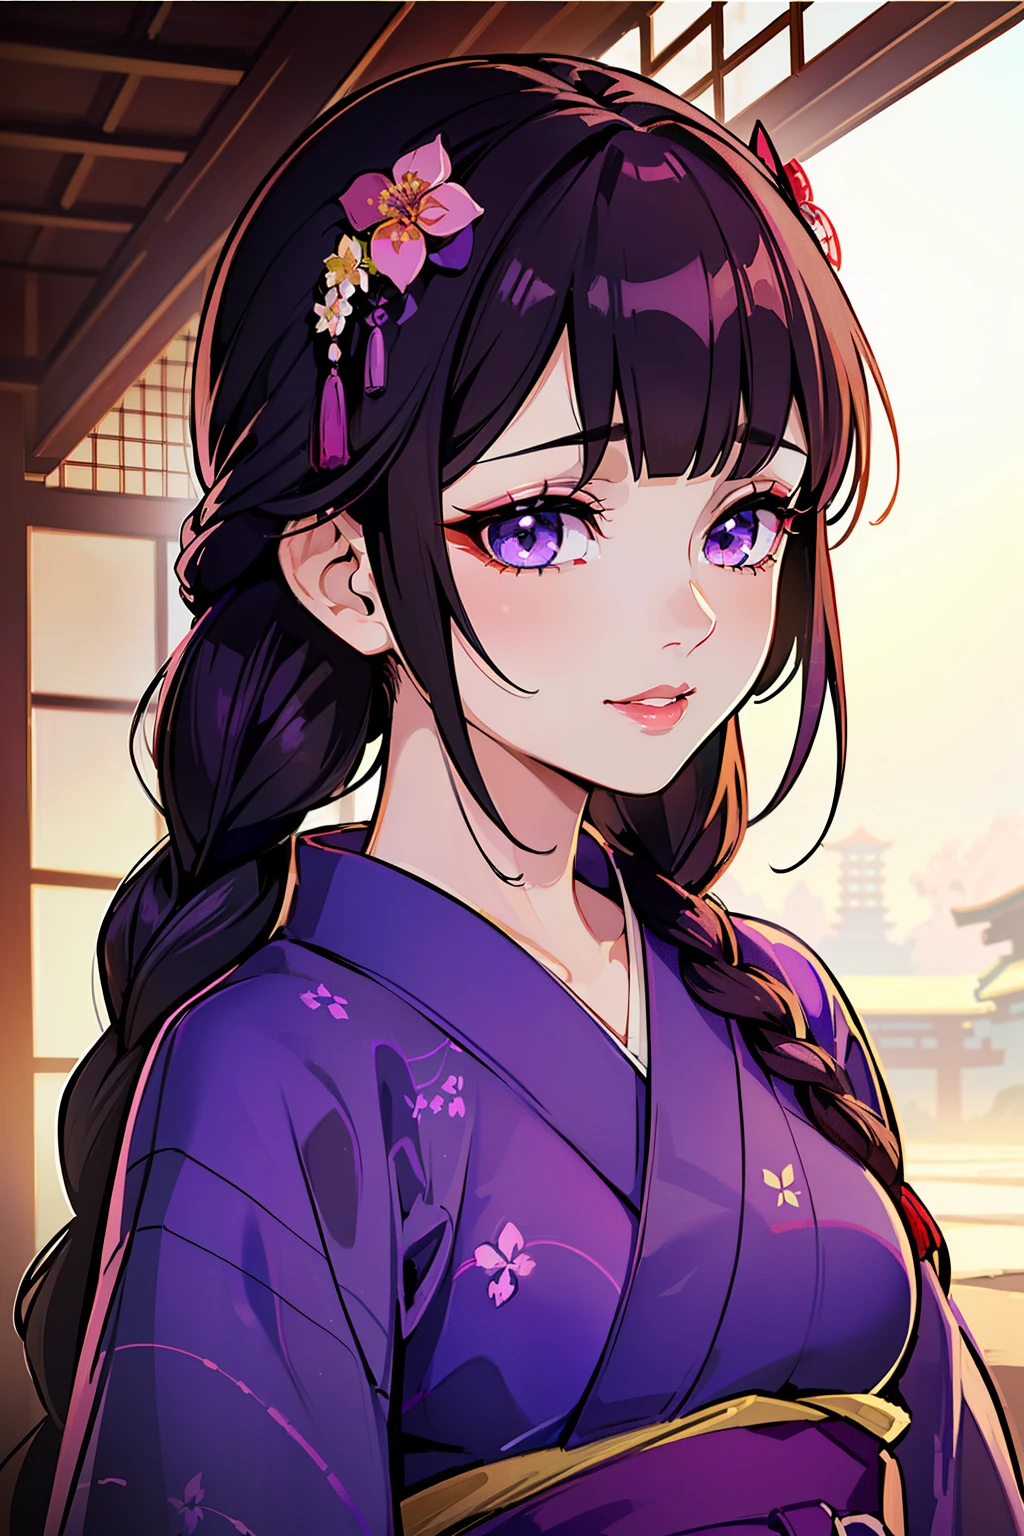 (high-quality, breathtaking),(expressive eyes, perfect face) (((yukata, sexy lips)), 1girl, female, solo, young adult, dark brown hair, purple coloured eyes, stylised hair, gentle smile, long length hair, loose hair, side bangs, braided, japanese clothing, elegant, soft make up, flower accessory in hair, demon slayer art style